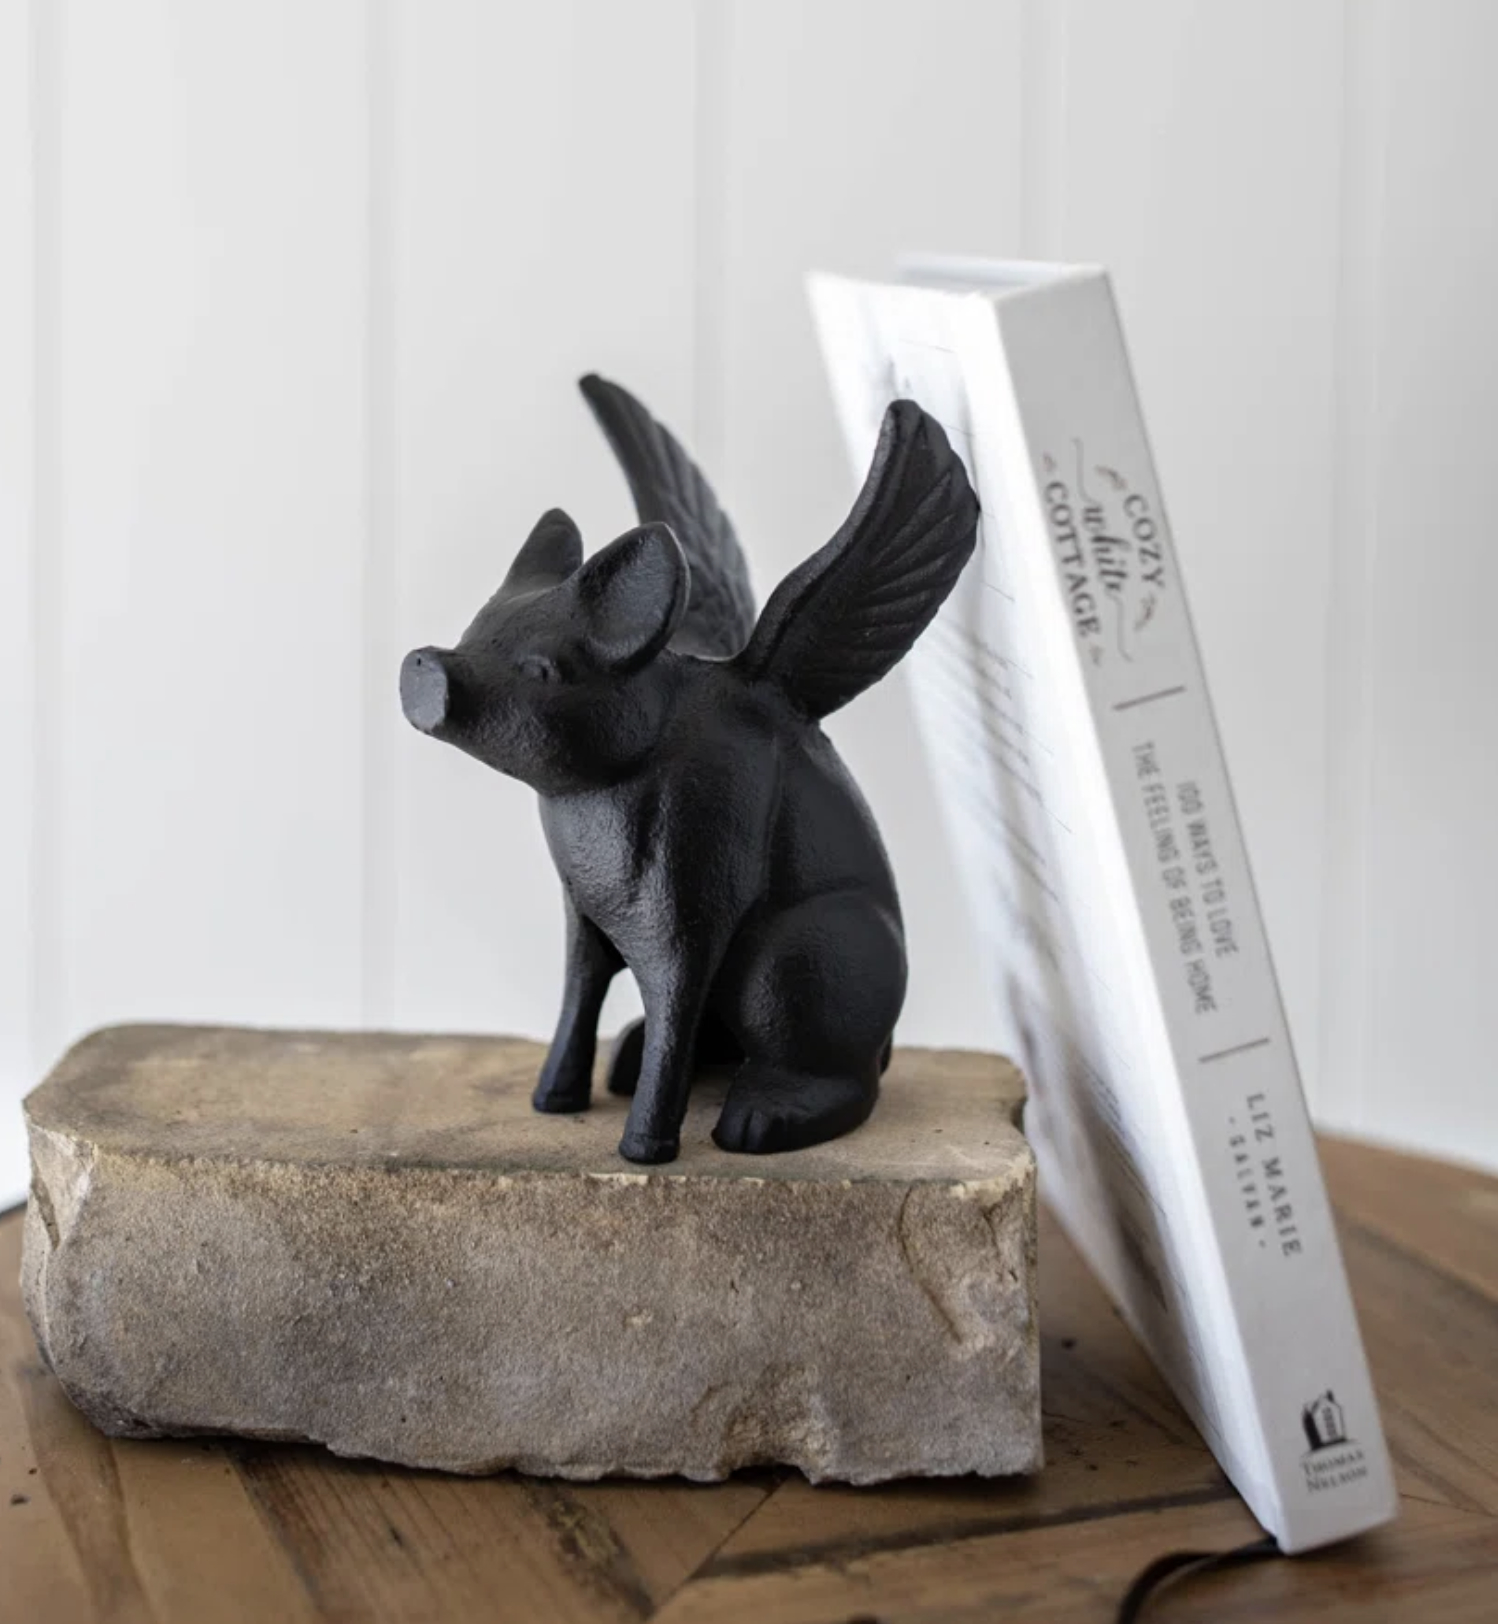 A winged pig figurine sits on a stone beside a propped book